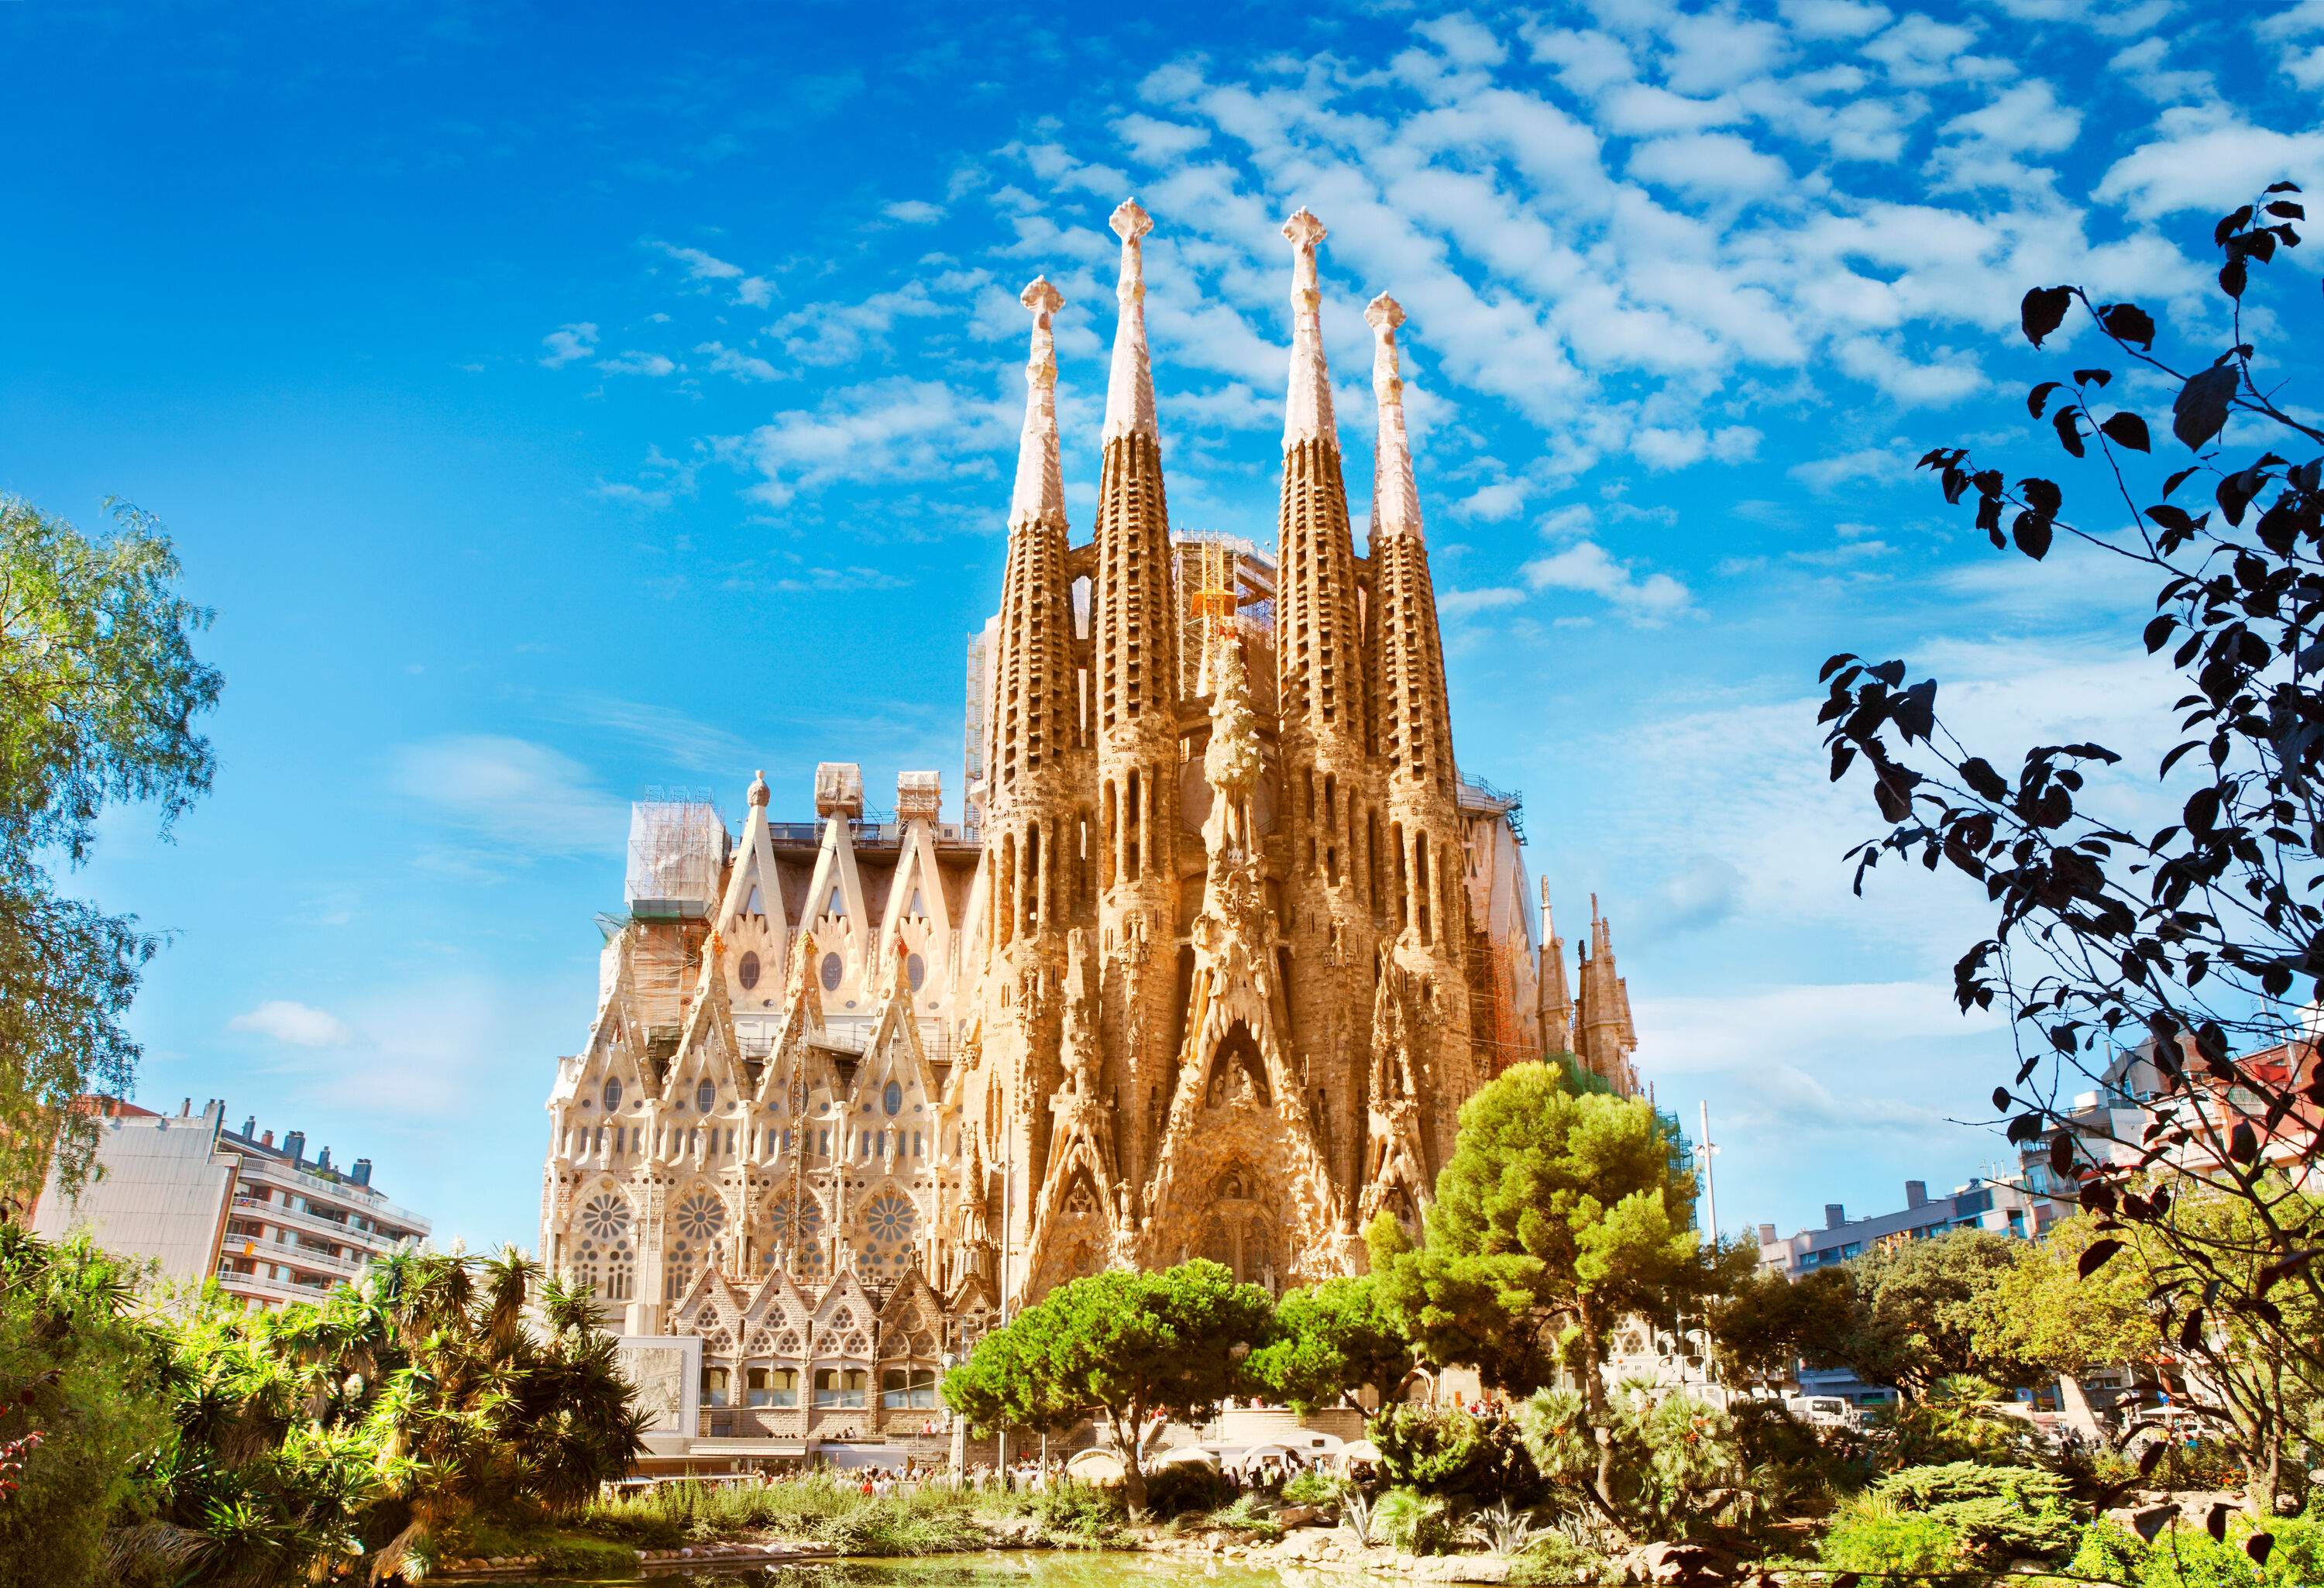 The majestic palatial façade of the Sagrada Familia cathedral in Barcelona, ​​Spain features Gothic and curvaceous Art Nouveau architecture.